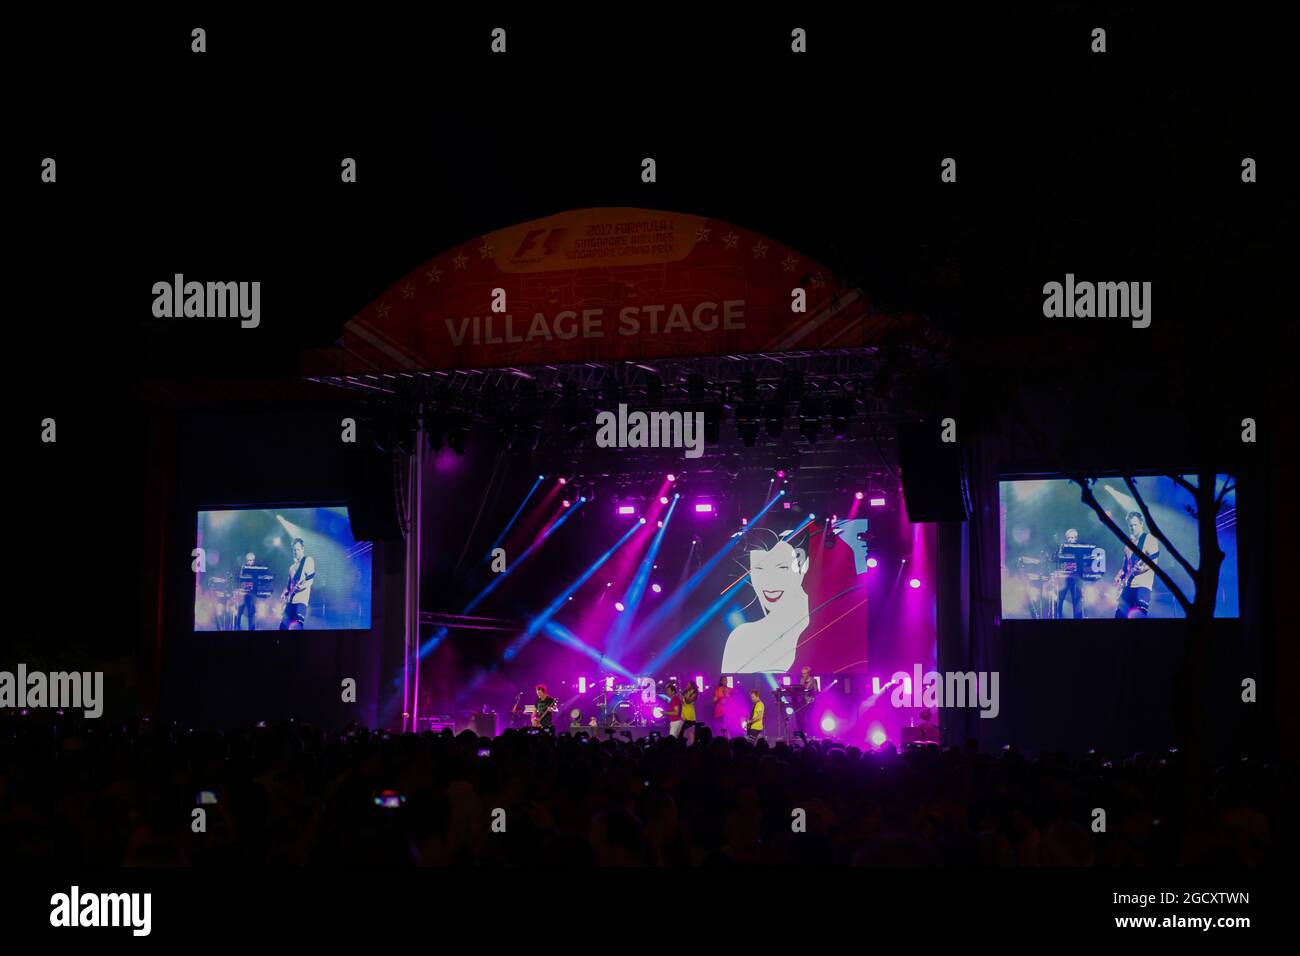 Concert taking place on the Village Stage. Singapore Grand Prix, Saturday 16th September 2017. Marina Bay Street Circuit, Singapore. Stock Photo